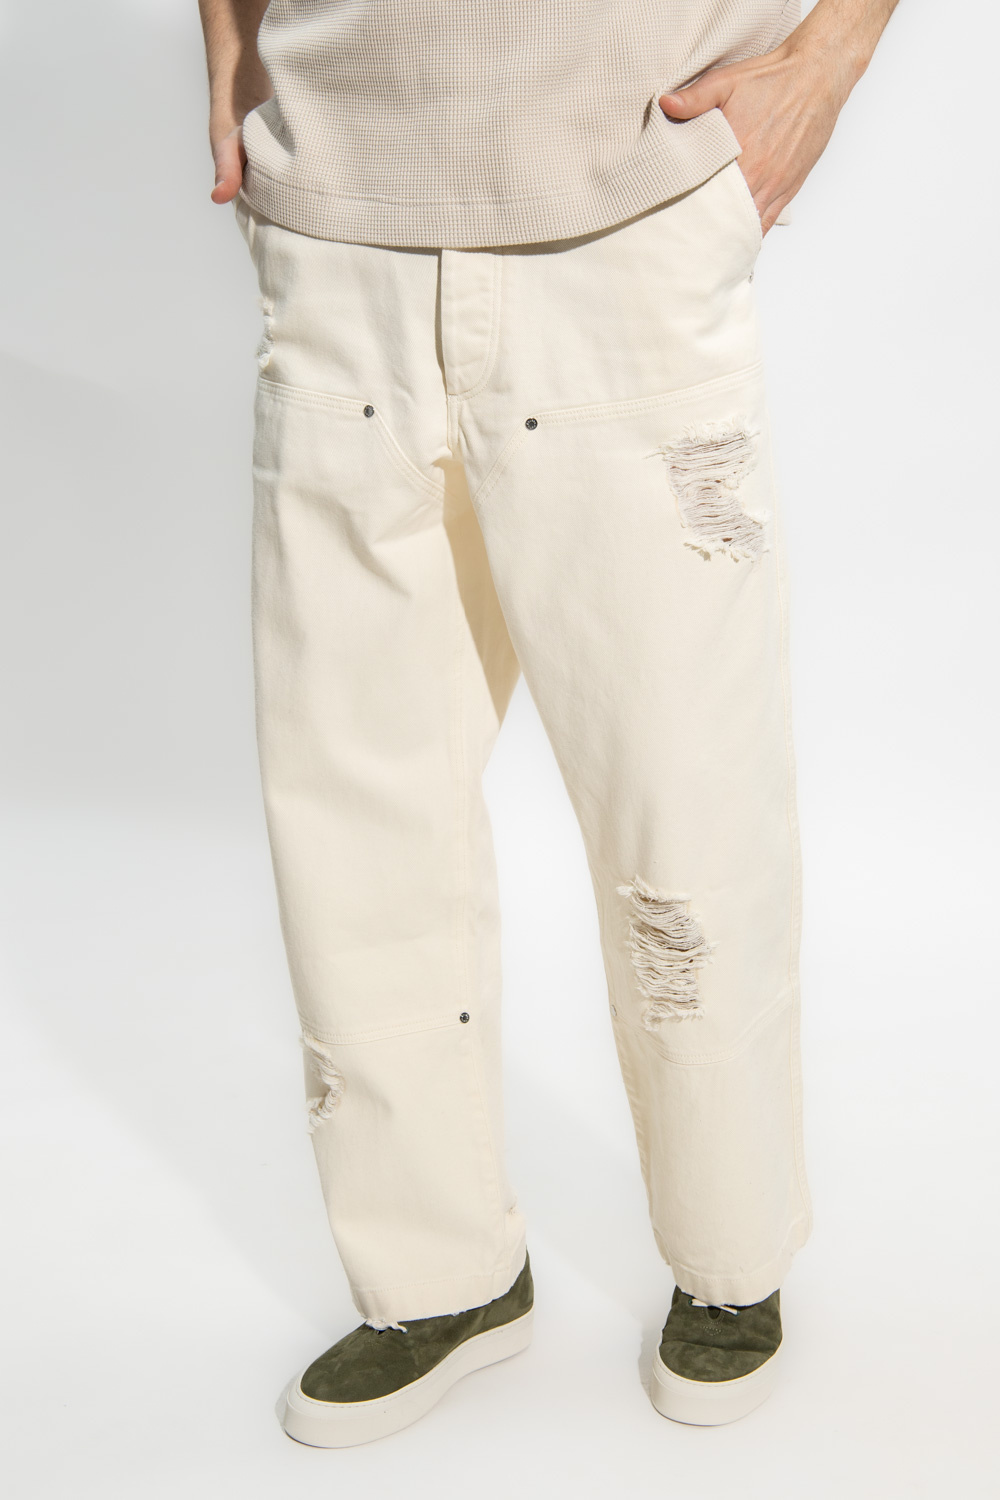 Etudes Pt01 mid-rise tapered jeans